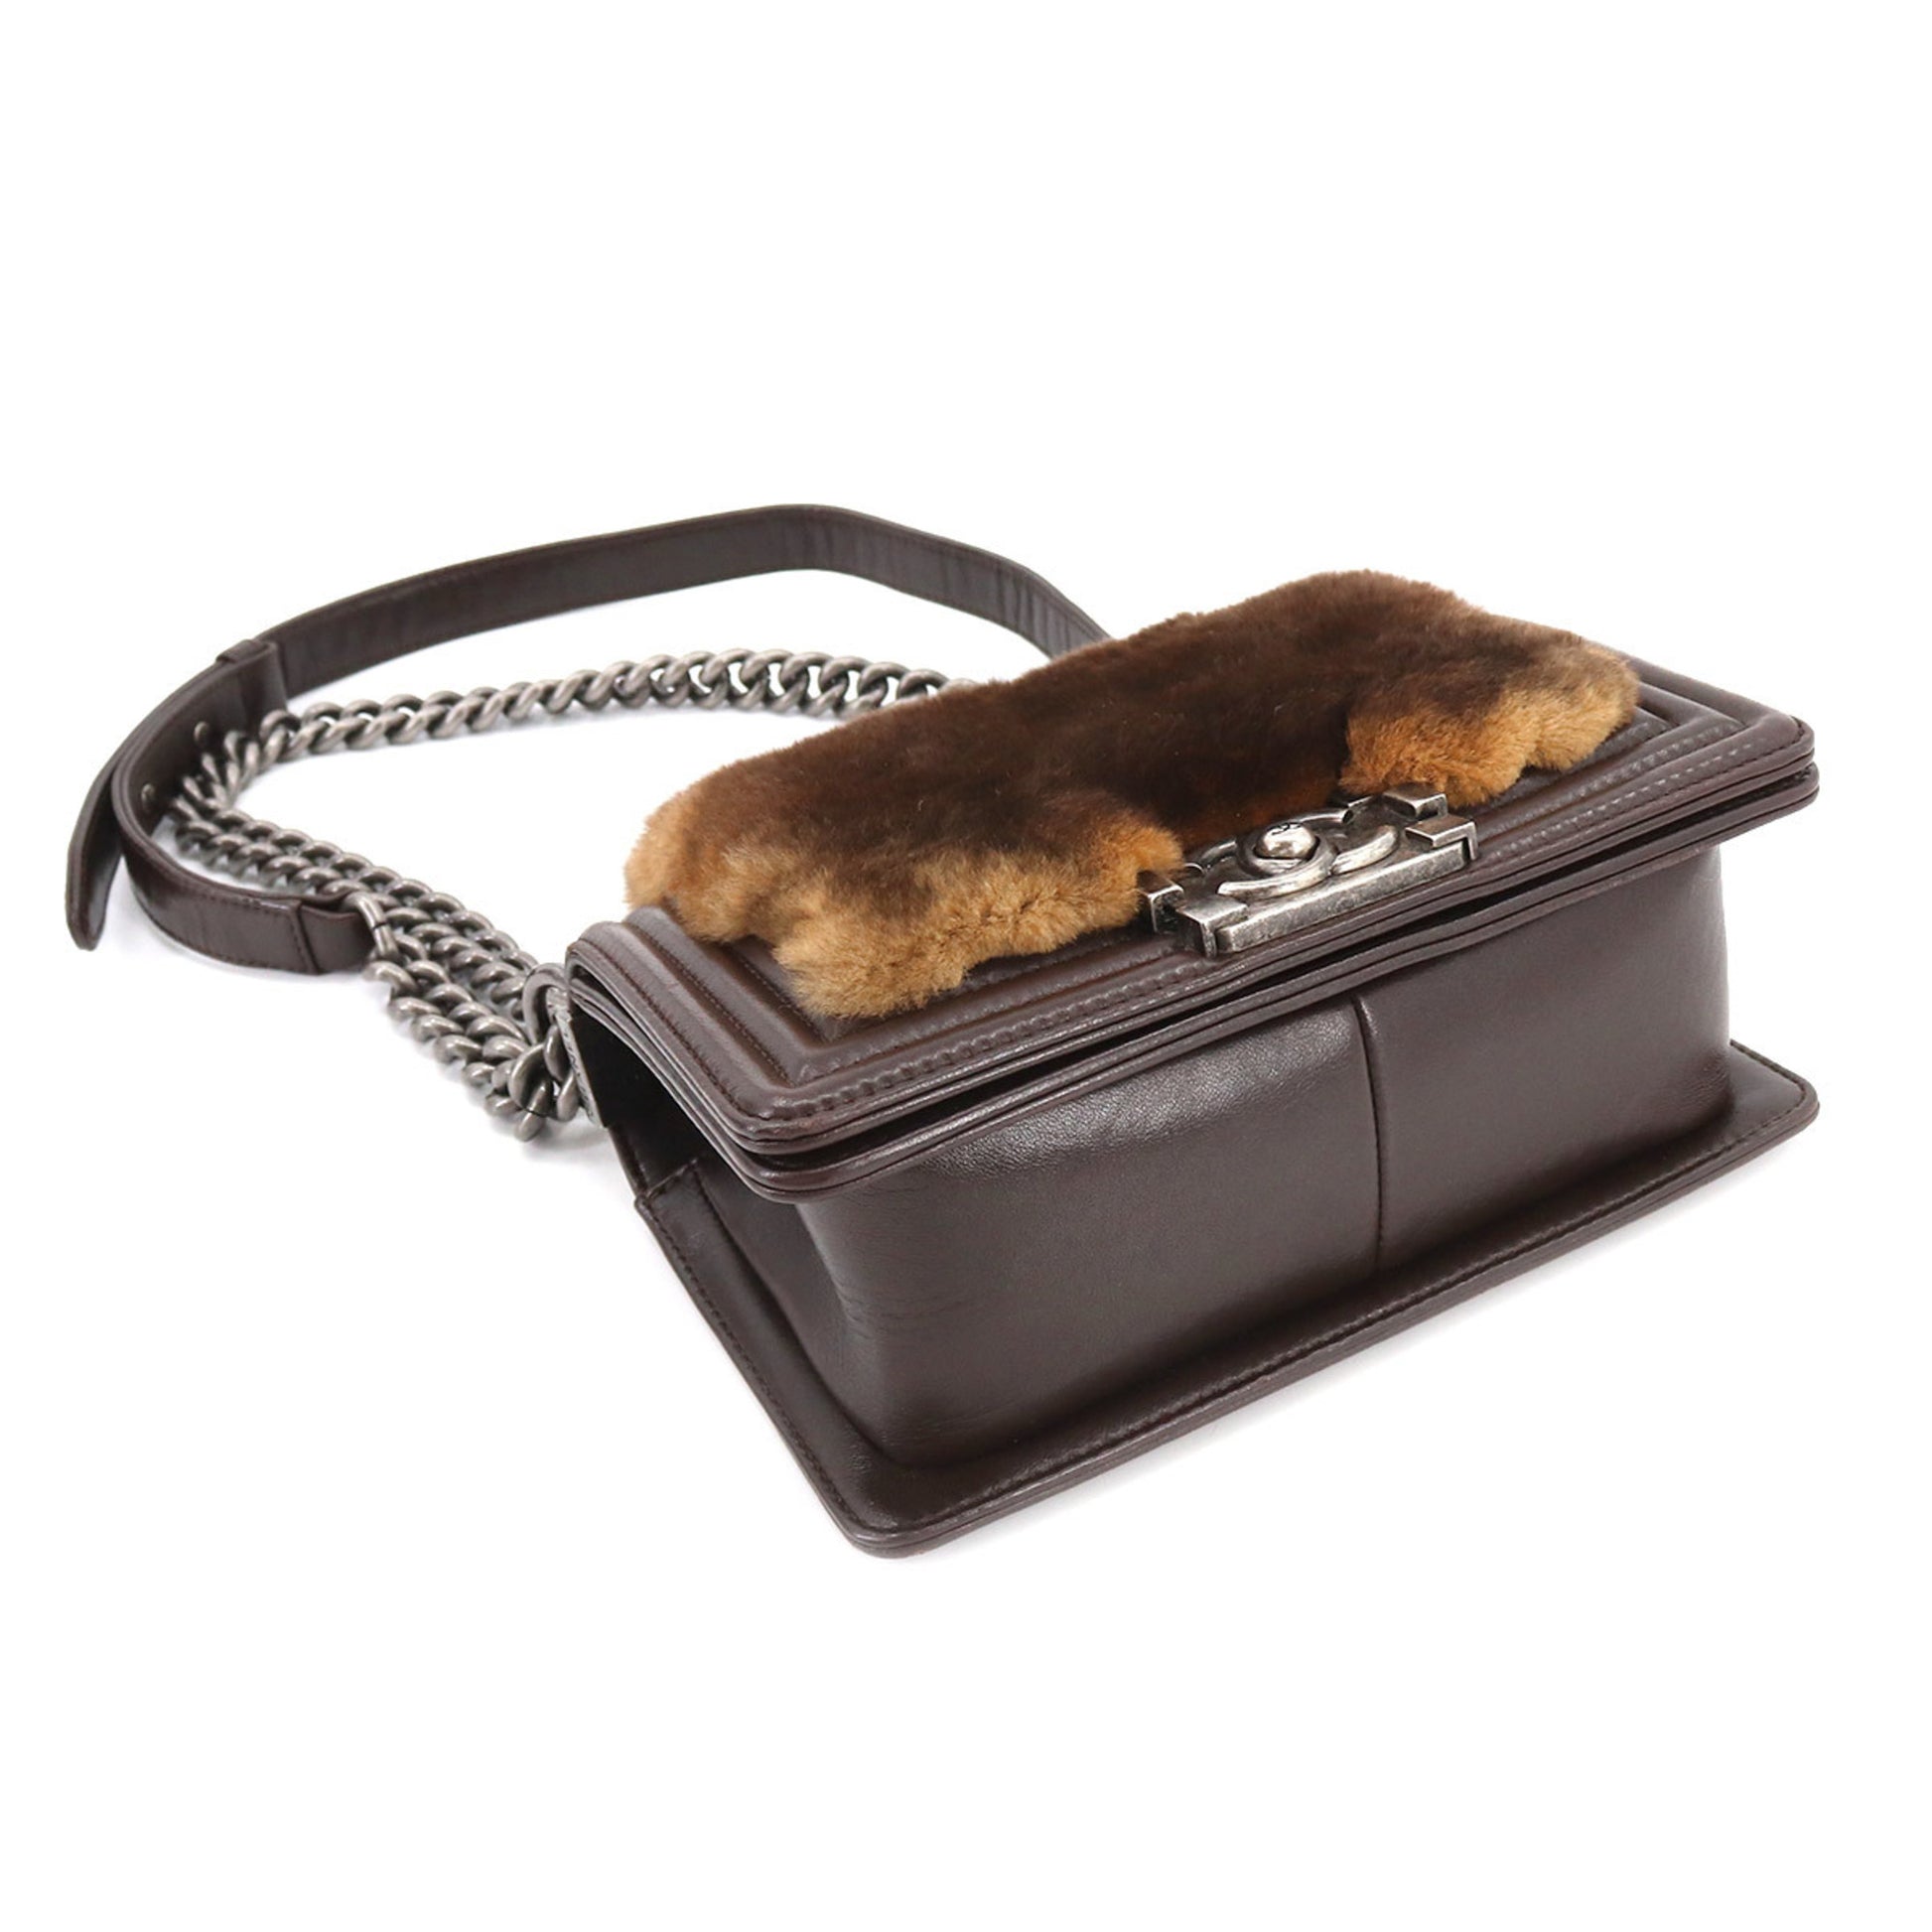 Chanel Brown Rabbit Fur Shoulder Bag with Leather and Chain Straps., Lot  #77013